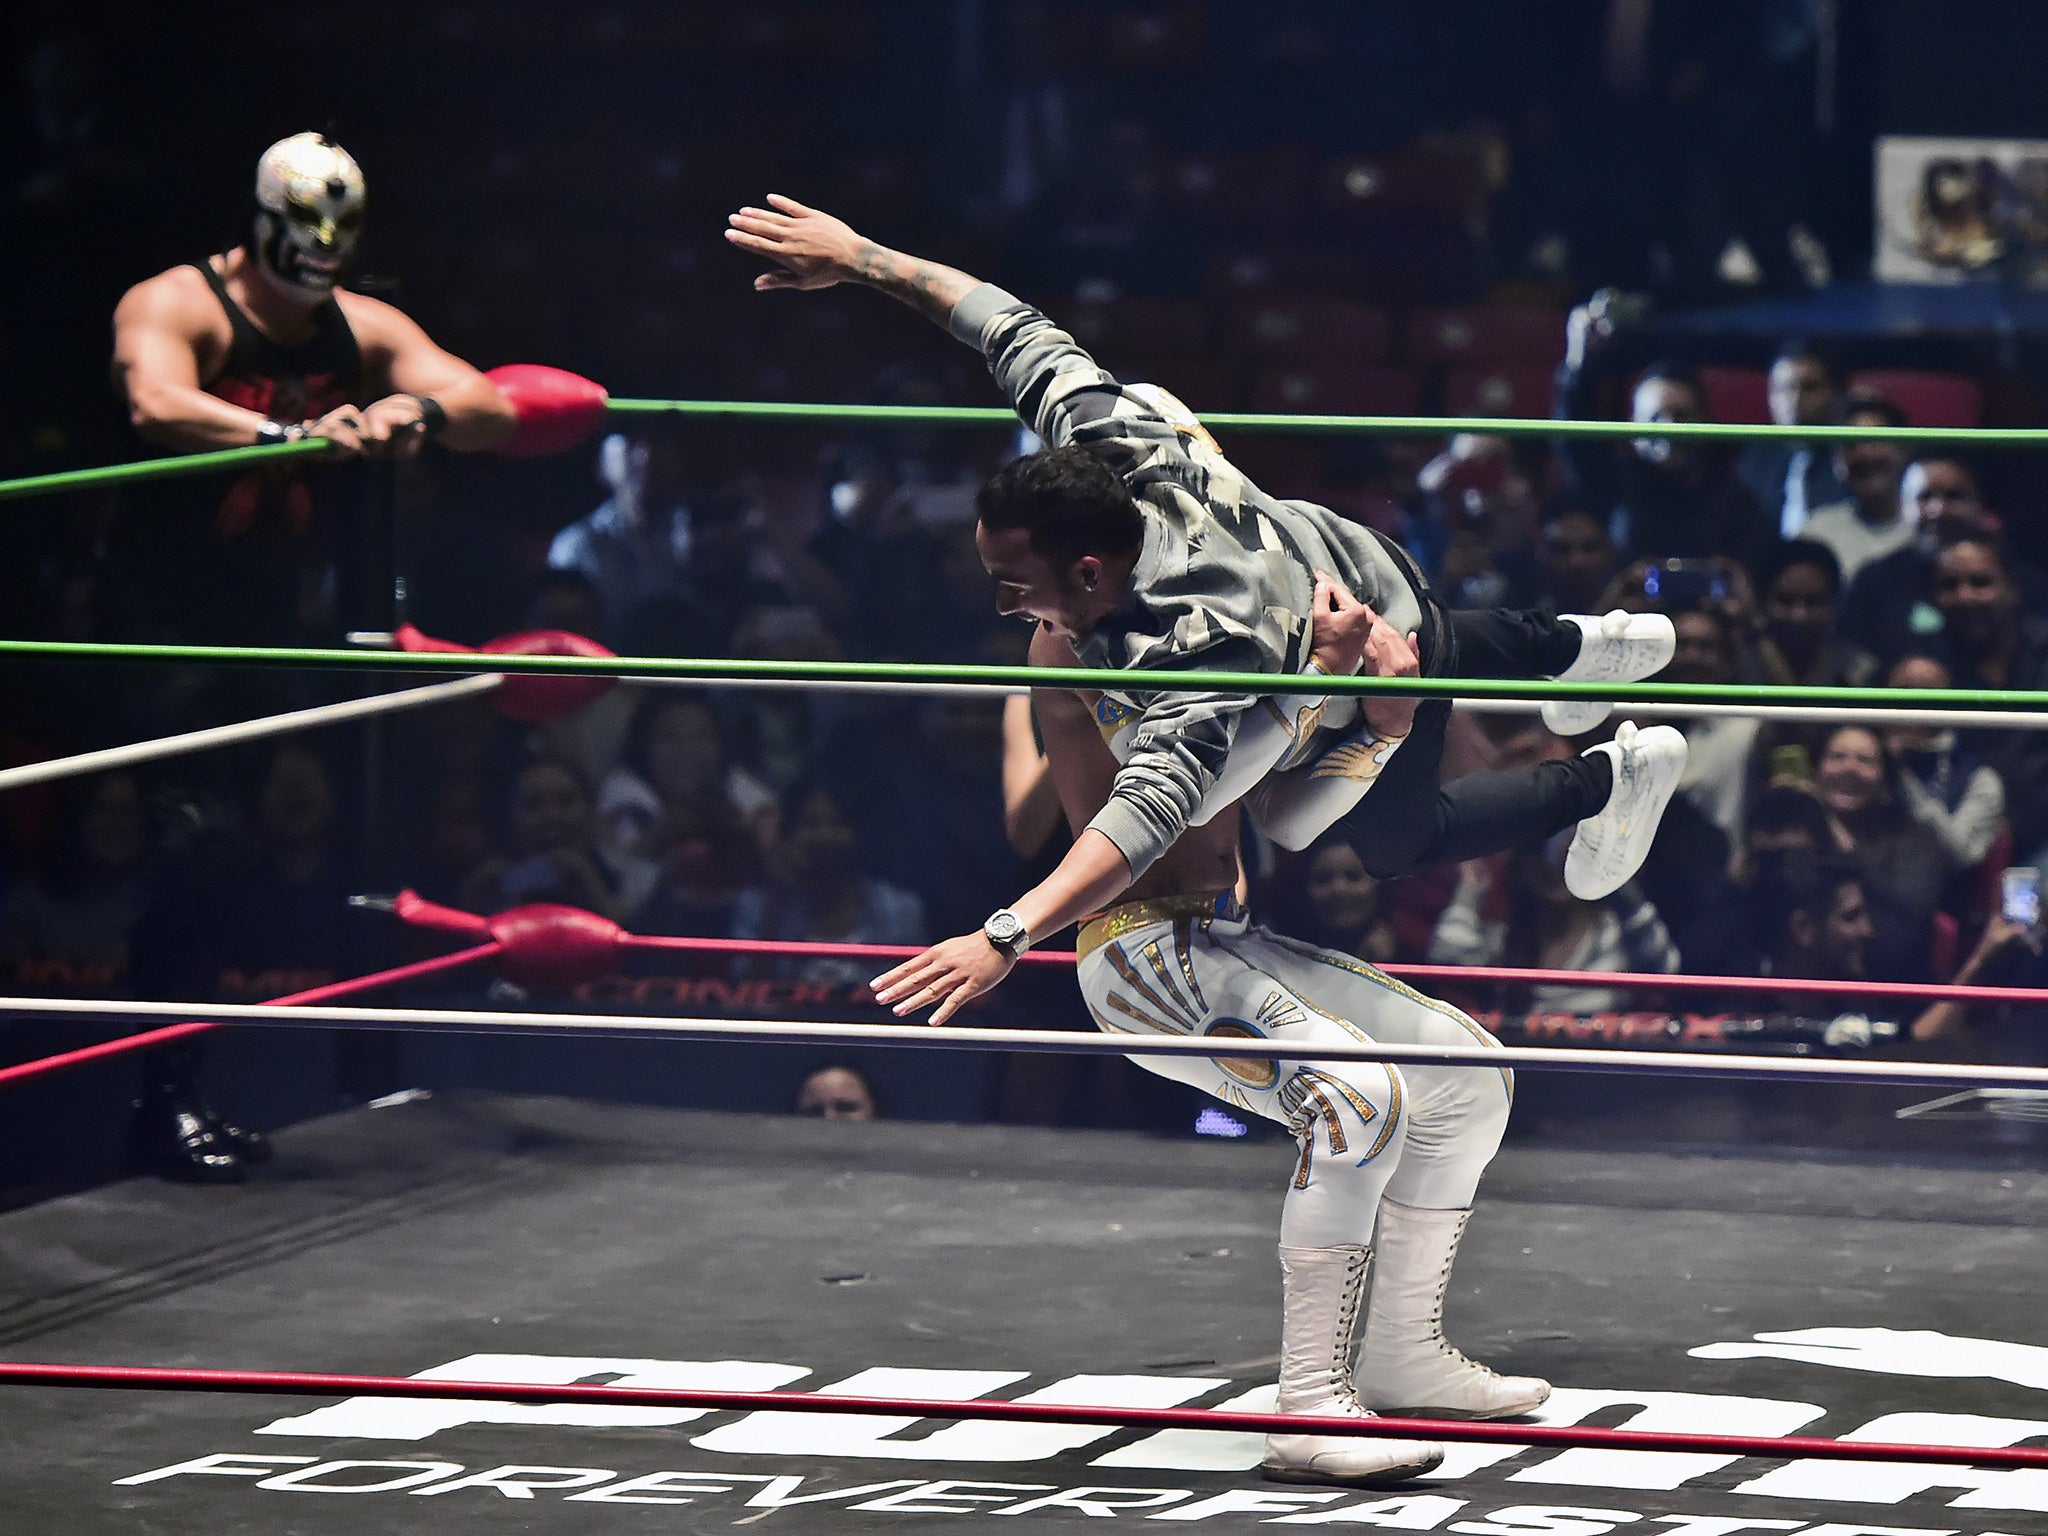 Lewis Hamilton taking part in a Mexican wrestling match